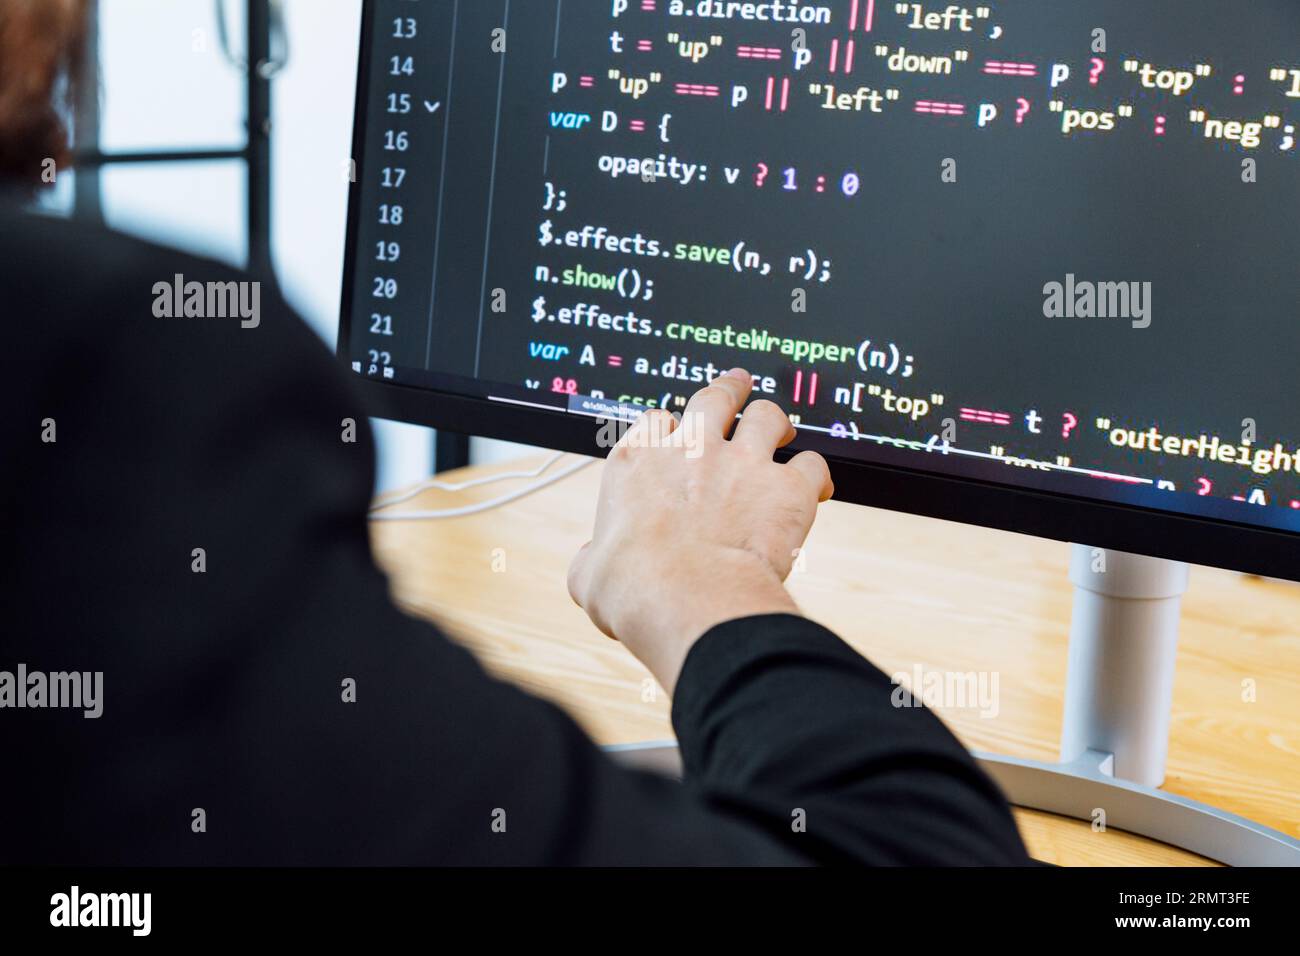 Professional development programer programming game software or developing code for shopping online financial data security system network working at Stock Photo